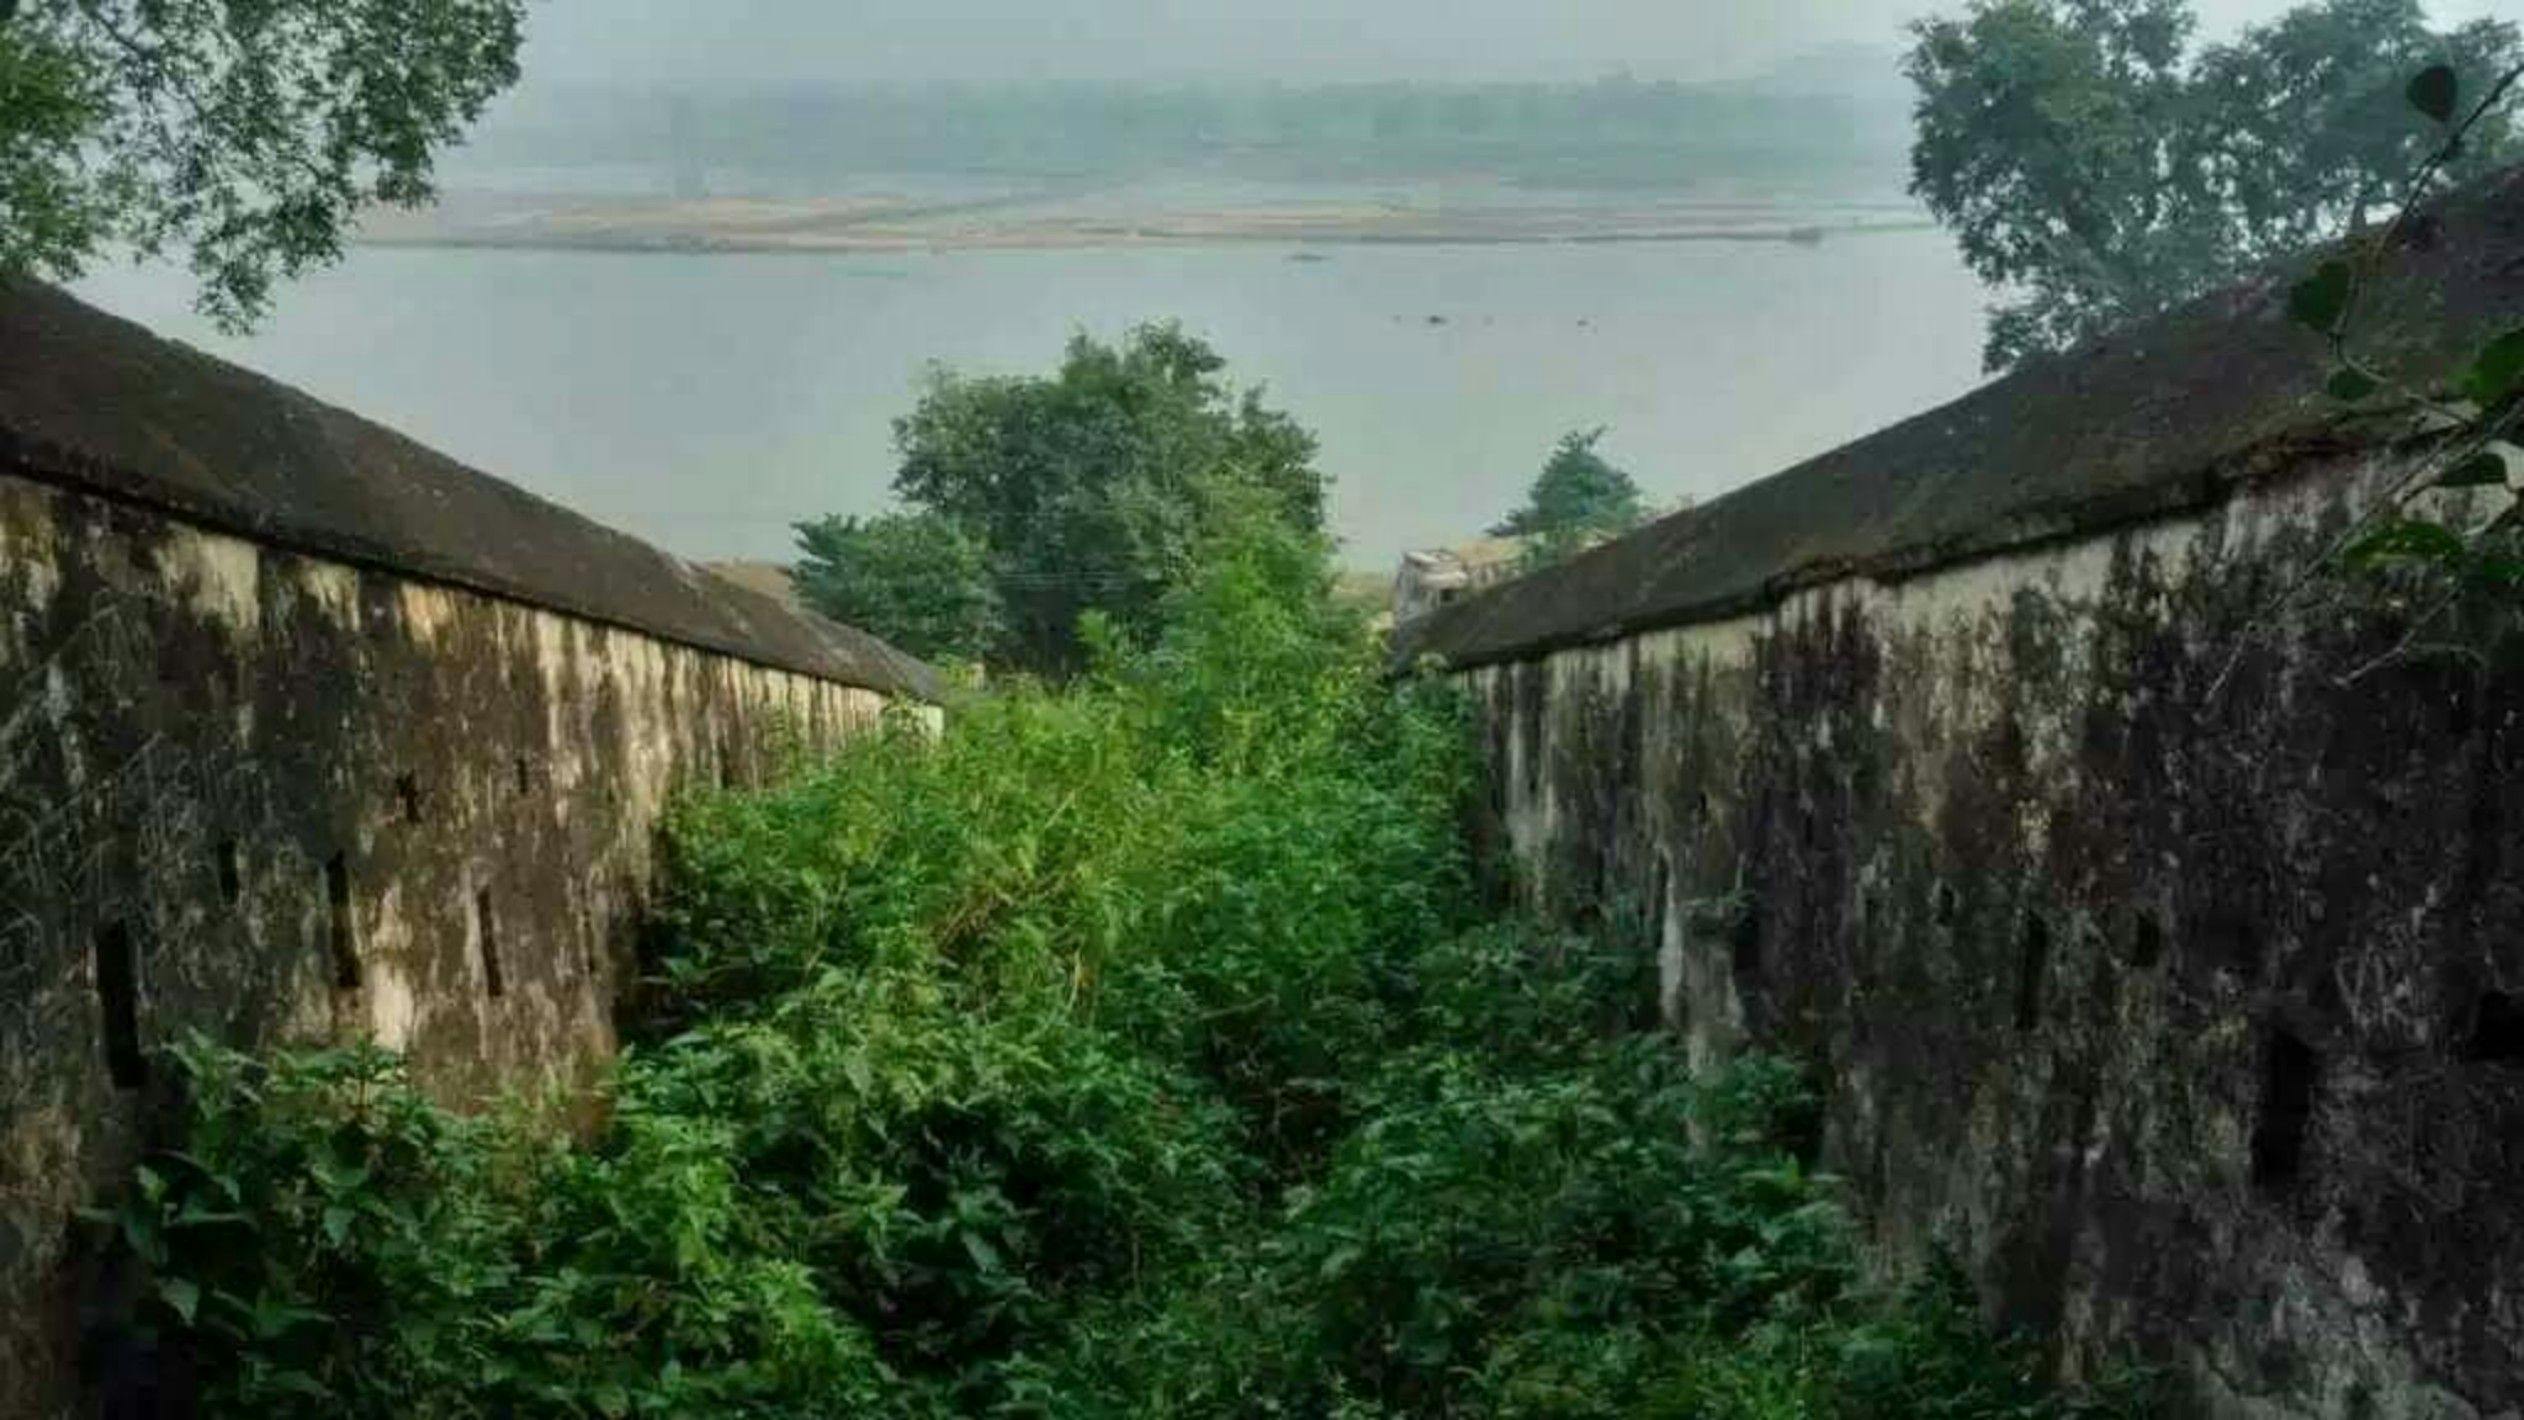 Queen’s Passage to Sone River from Agori Fort